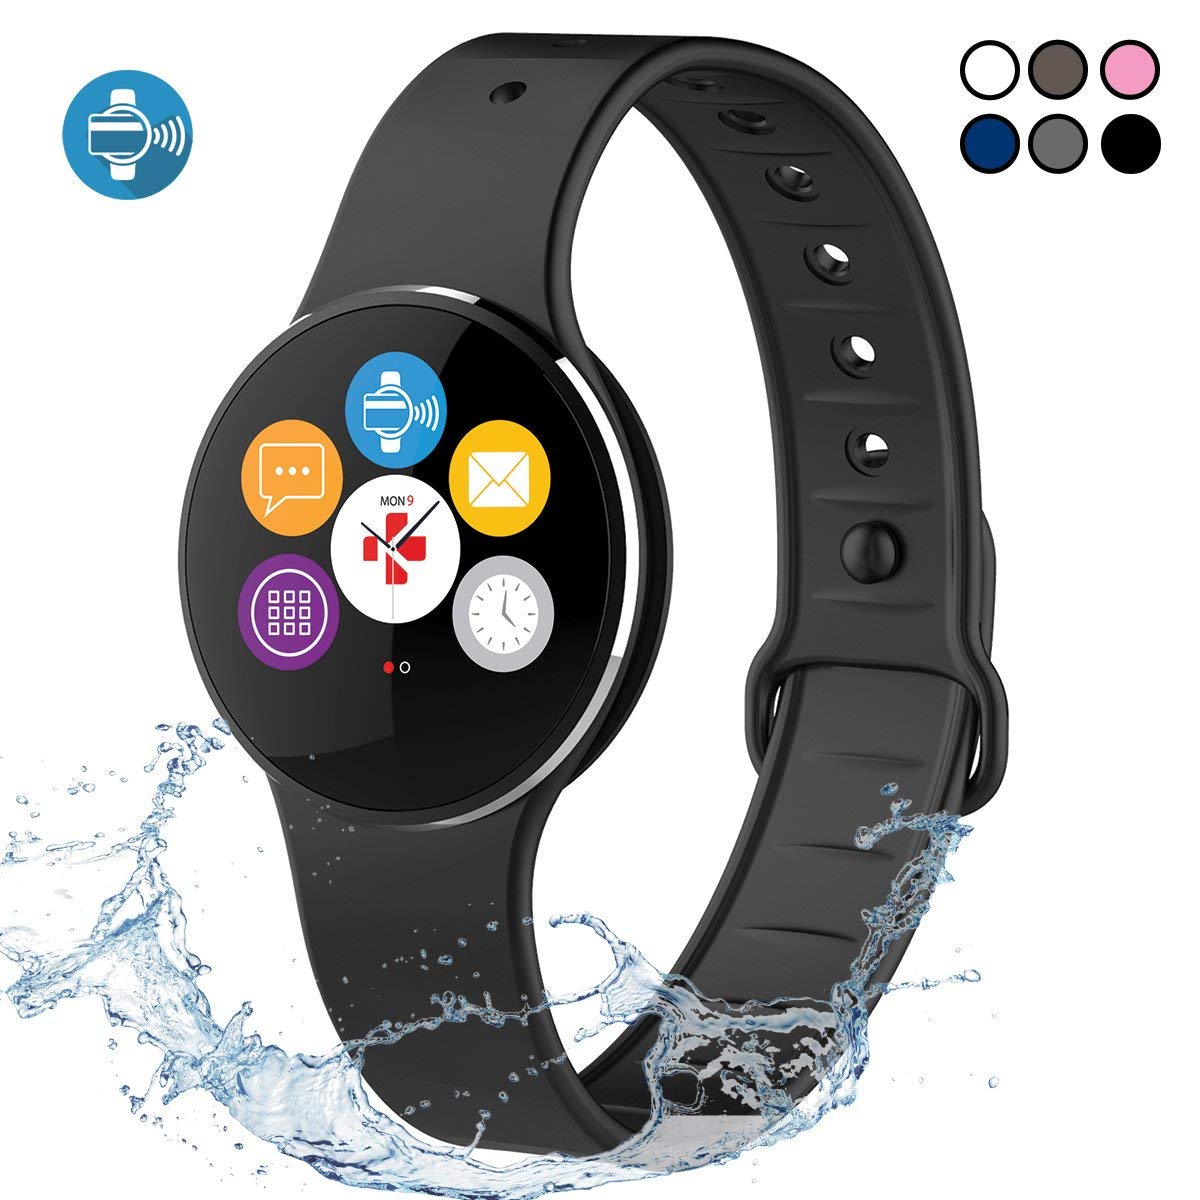 MyKronoz ZeCircle2 - Activity Tracker with Color Touchscreen, Smart Notifications and contactless Payment (Black/Black) 2